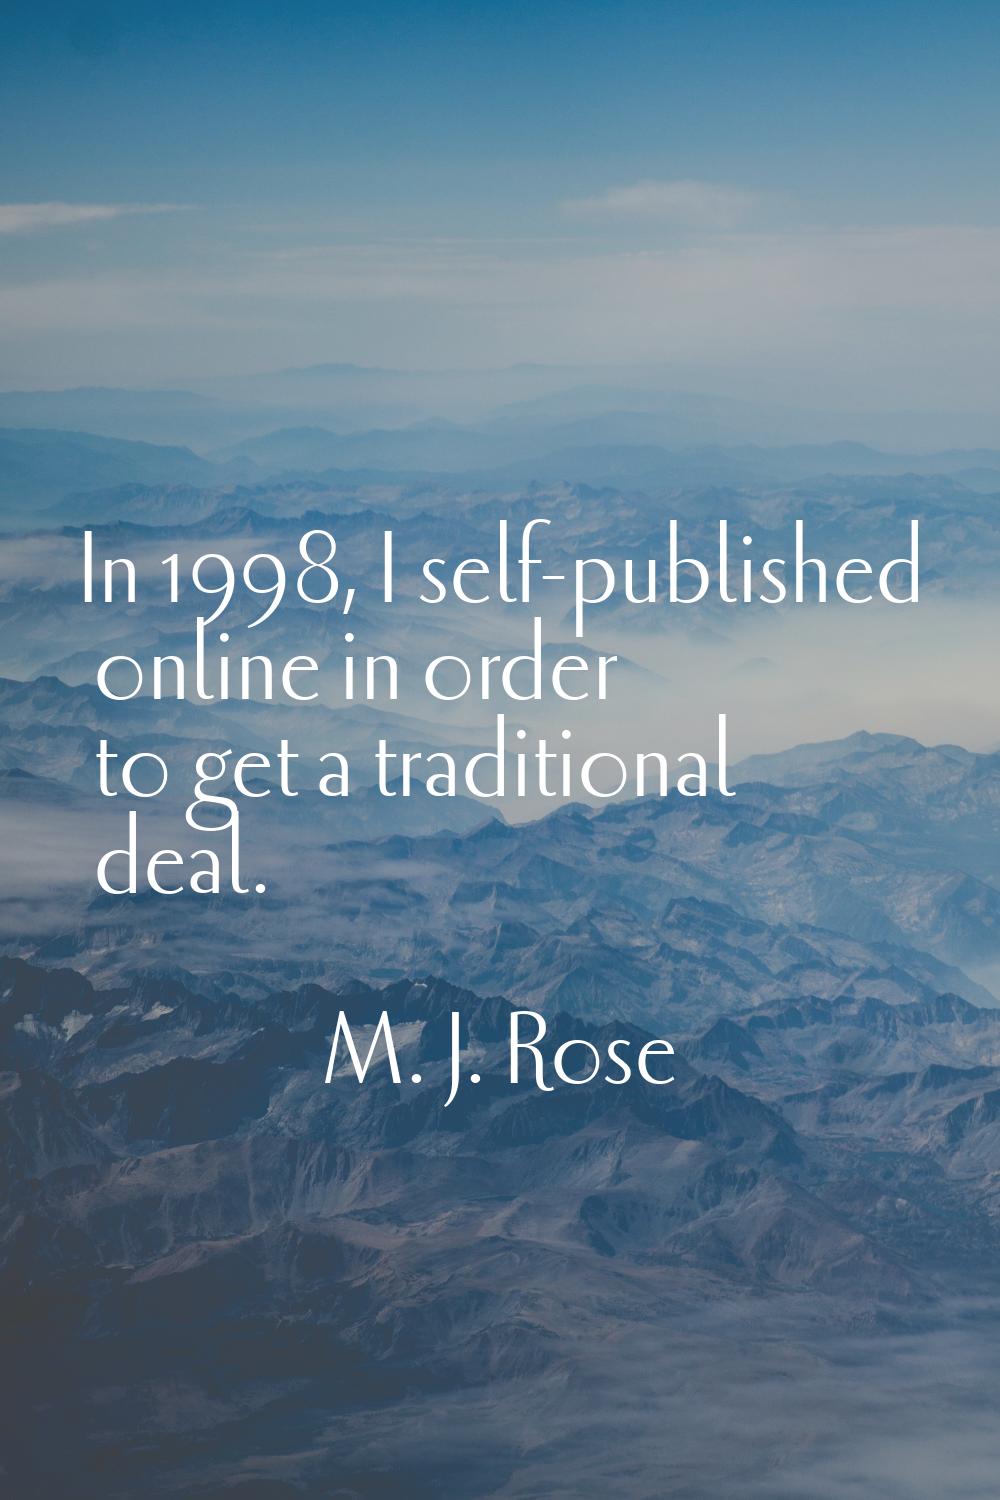 In 1998, I self-published online in order to get a traditional deal.